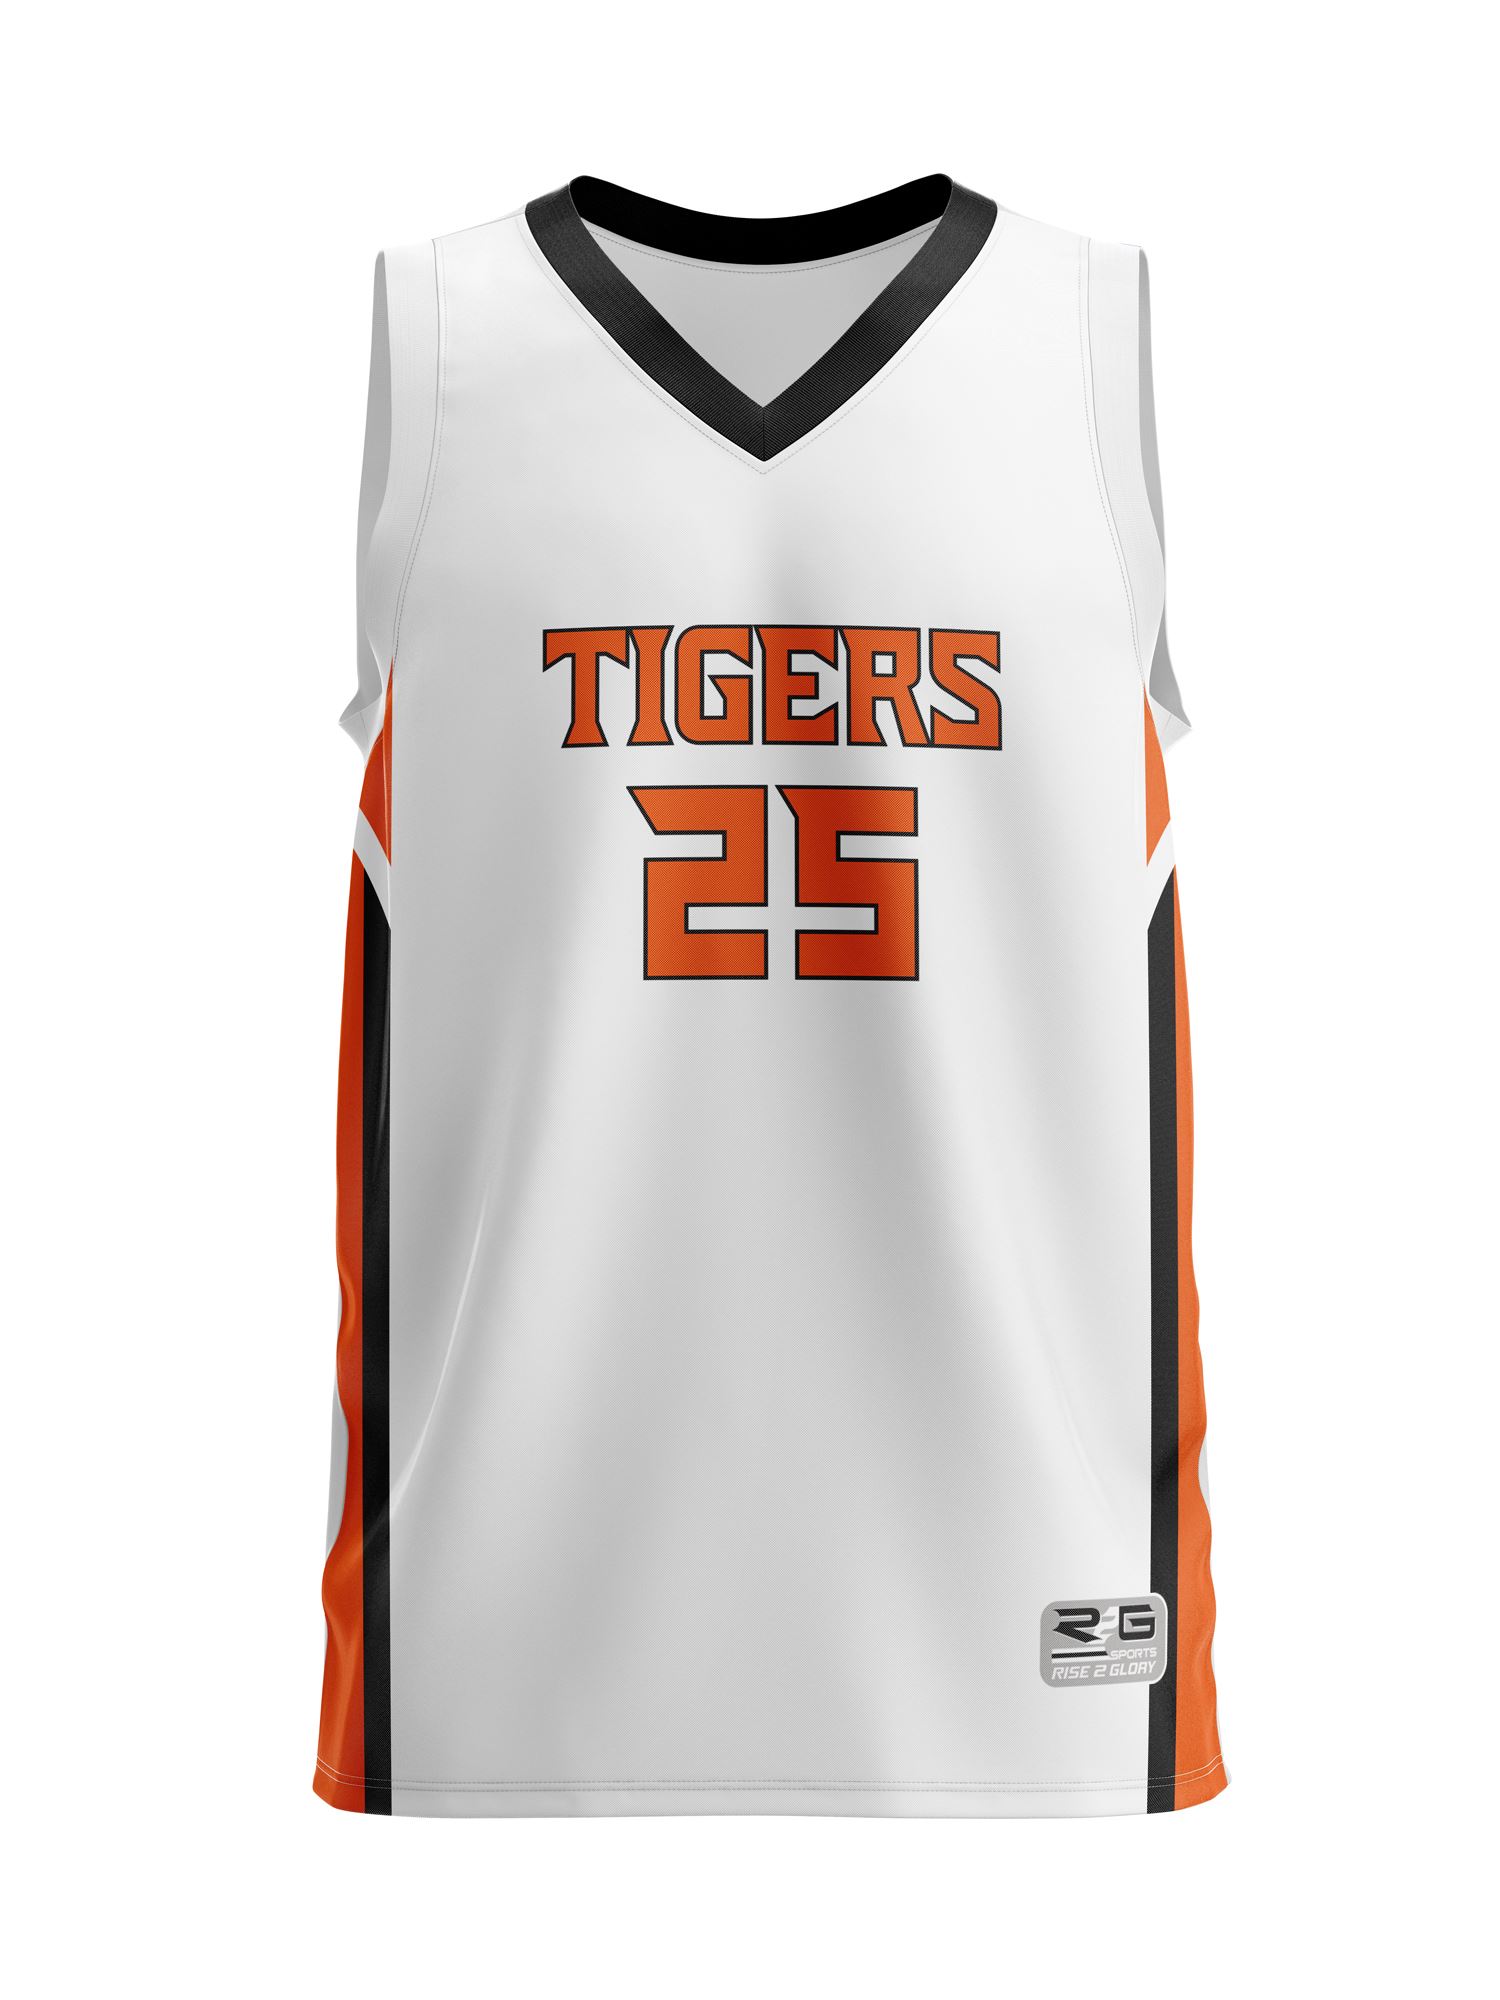 Full Dye Sub Basketball Jersey- front view